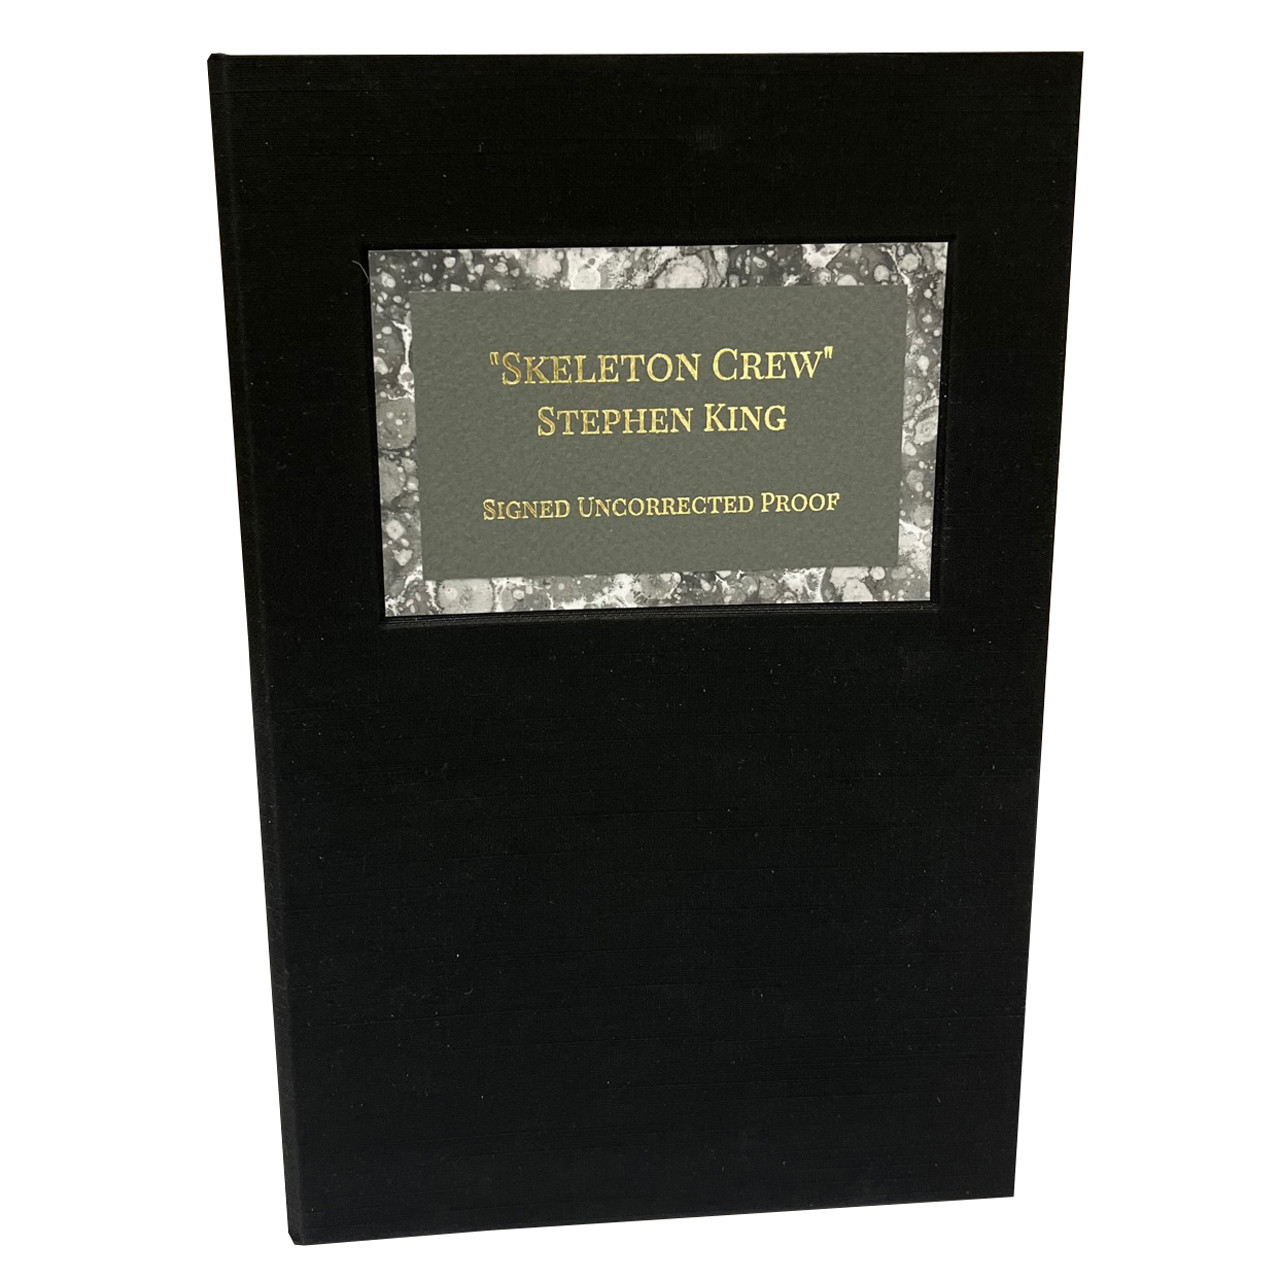 Stephen King "Skeleton Crew" Traycased Signed First Edition, First Printing UNCORRECTED PROOF FOR LIMITED DISTRIBUTION